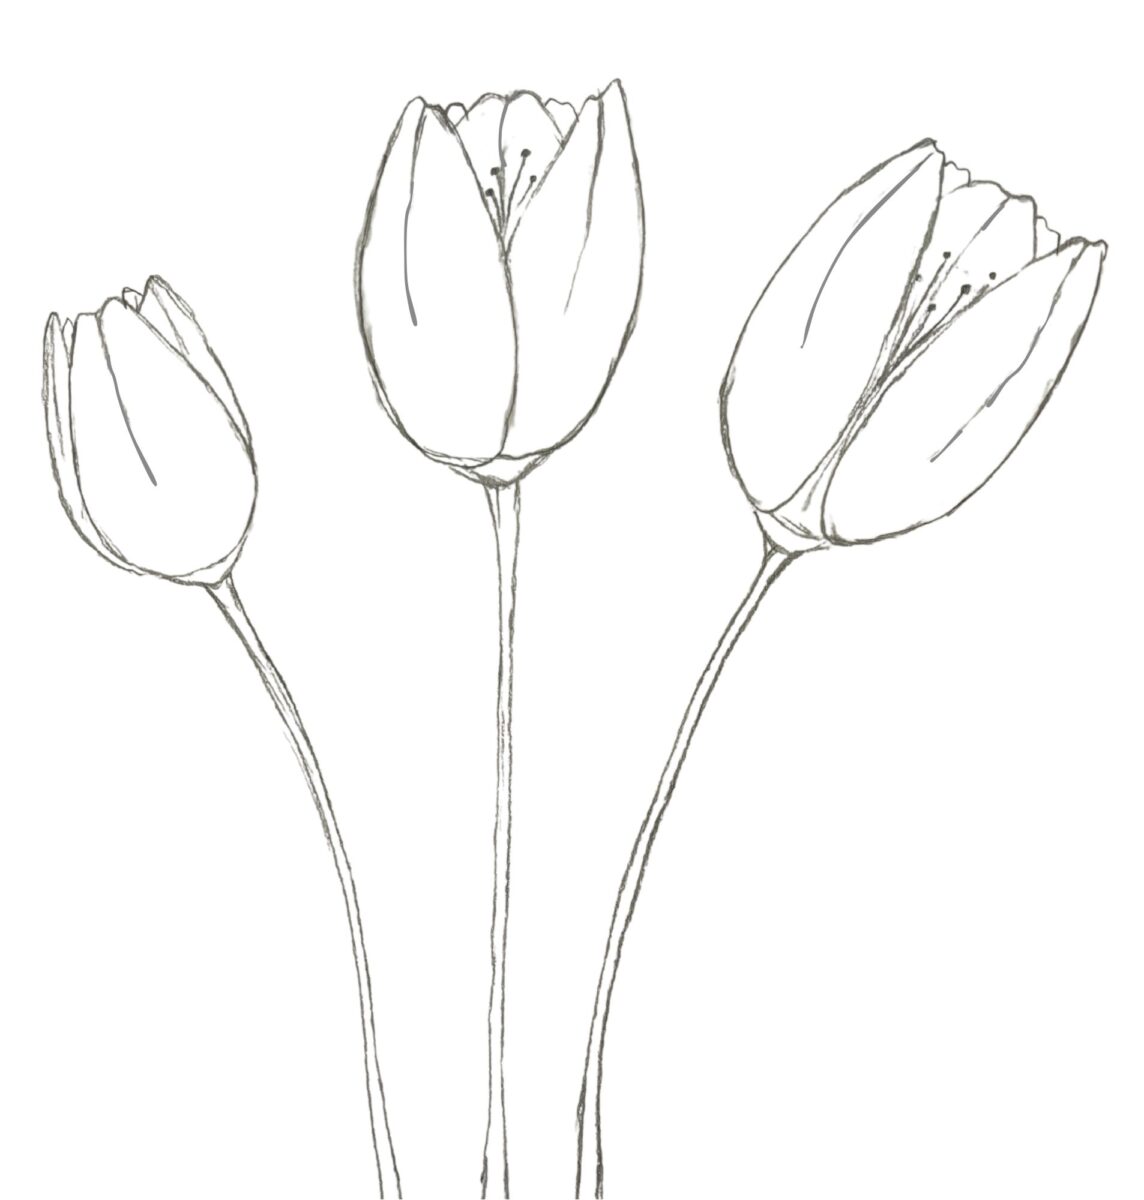 How to Draw Tulips: Easy Step-By-Step Tutorial For Beginners